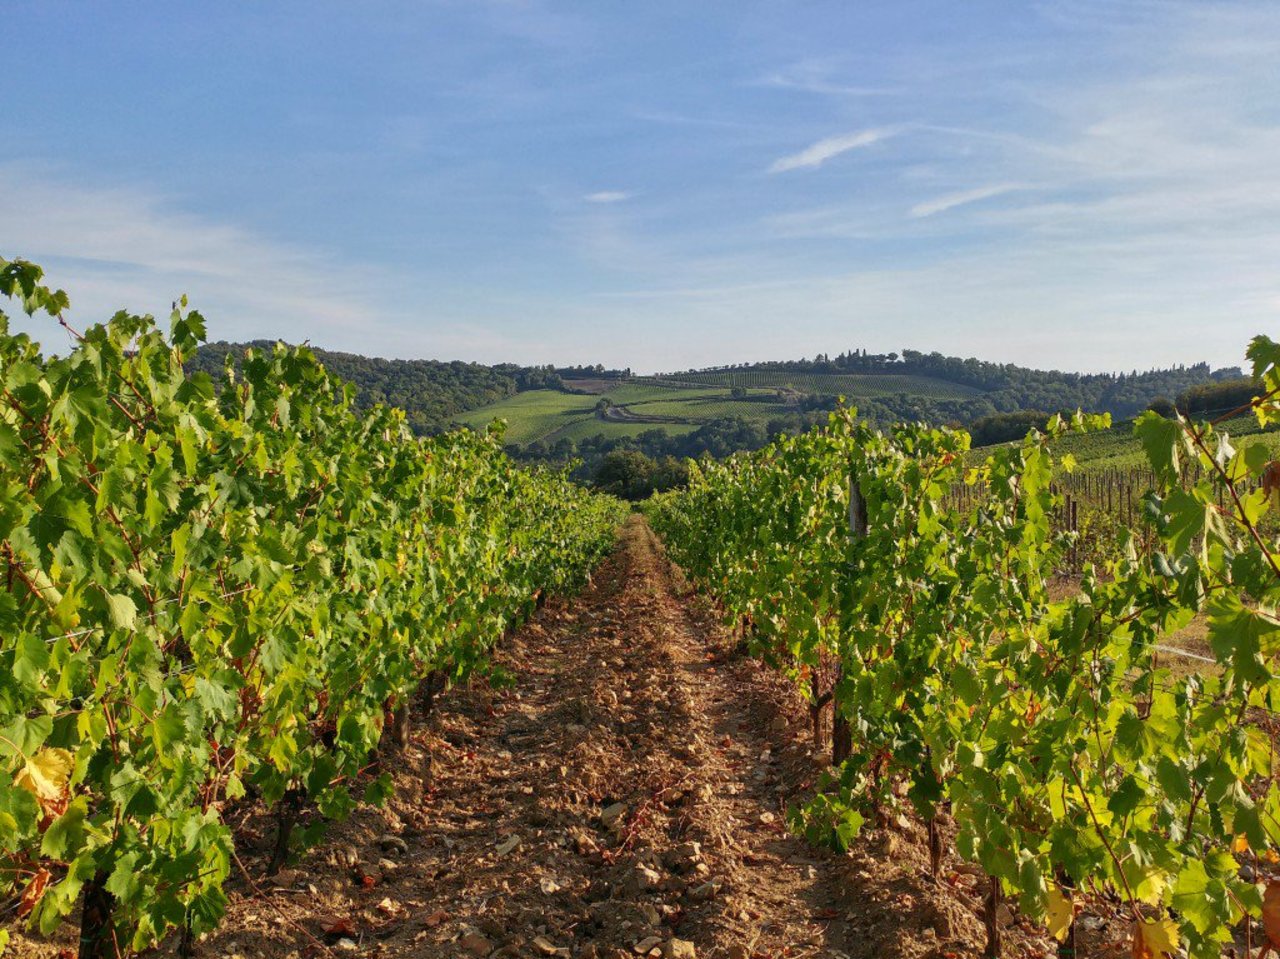 Gaiole in Chianti is home to many well-preserved castles and beautiful vineyards. Discover them all:… https://twitter.com/i/web/status/840170566879457280